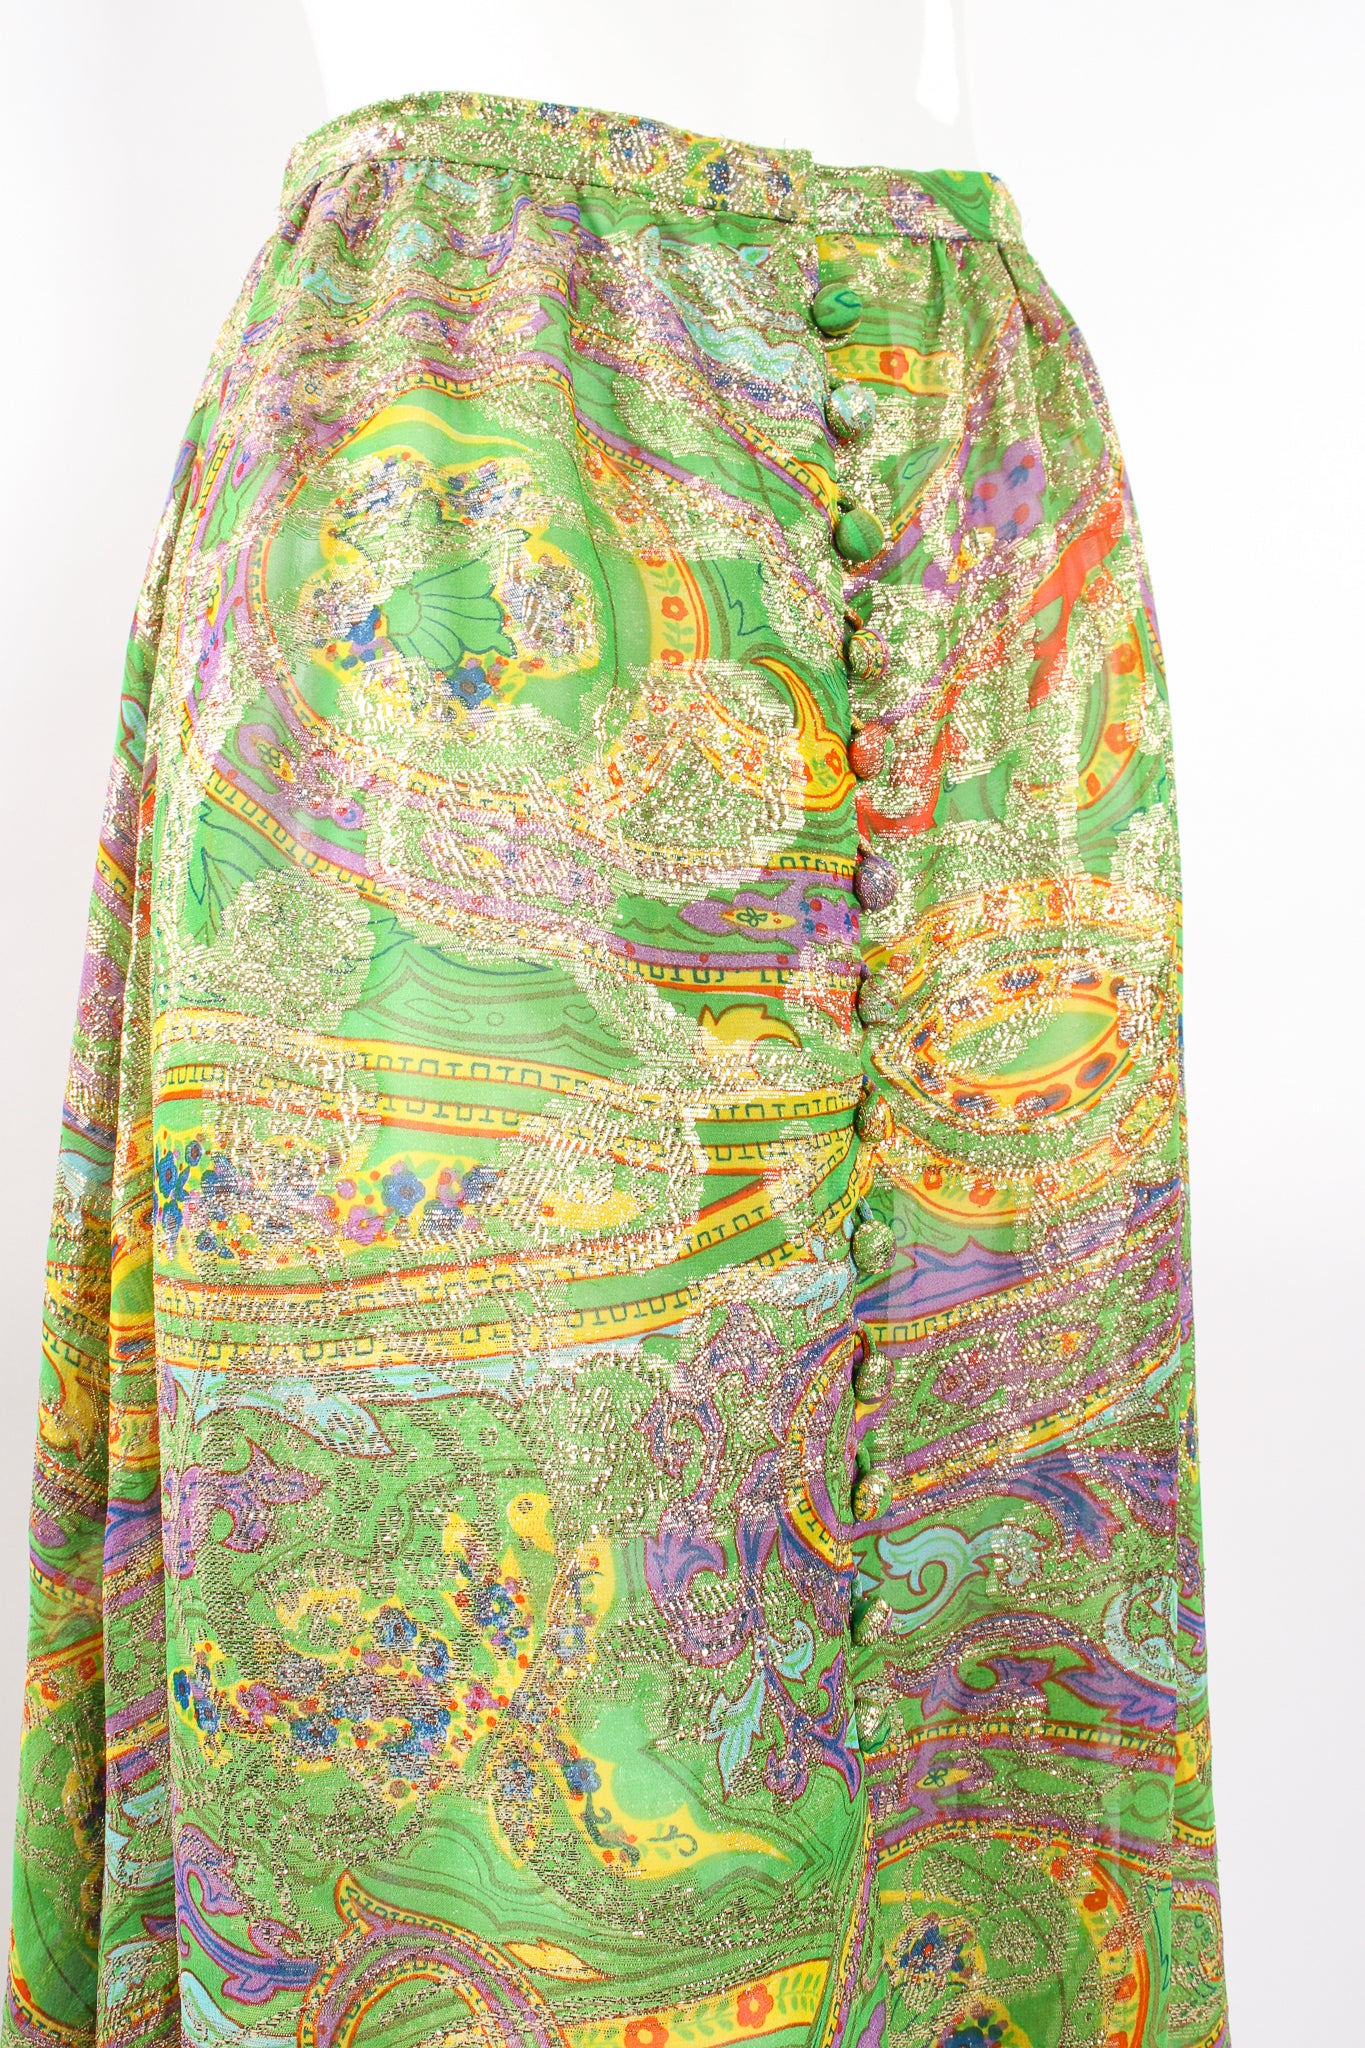 Vintage Malcolm Starr Paisley Brocade Maxi Skirt on Mannequin crop at Recess Los Angeles